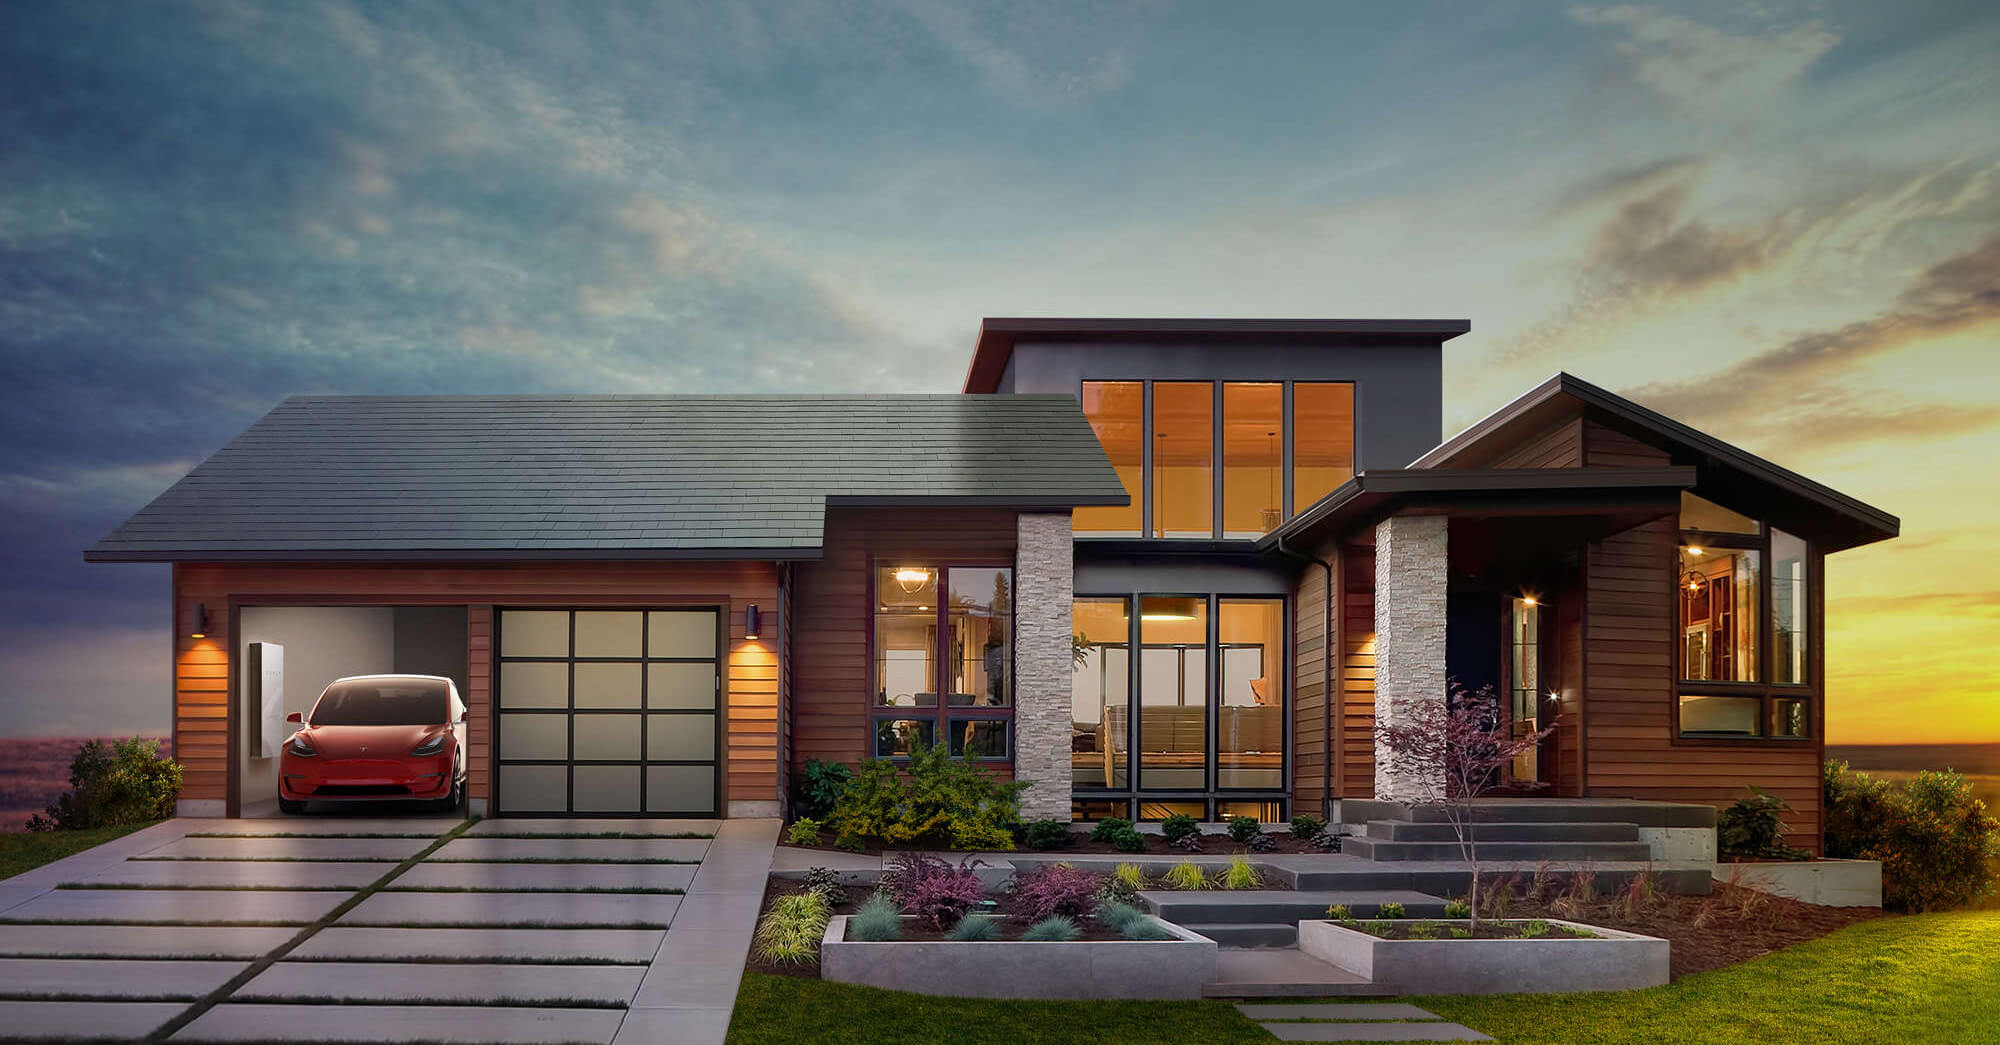 Tesla Solar Roof To Wait Or Not To Wait Southern Energy Management